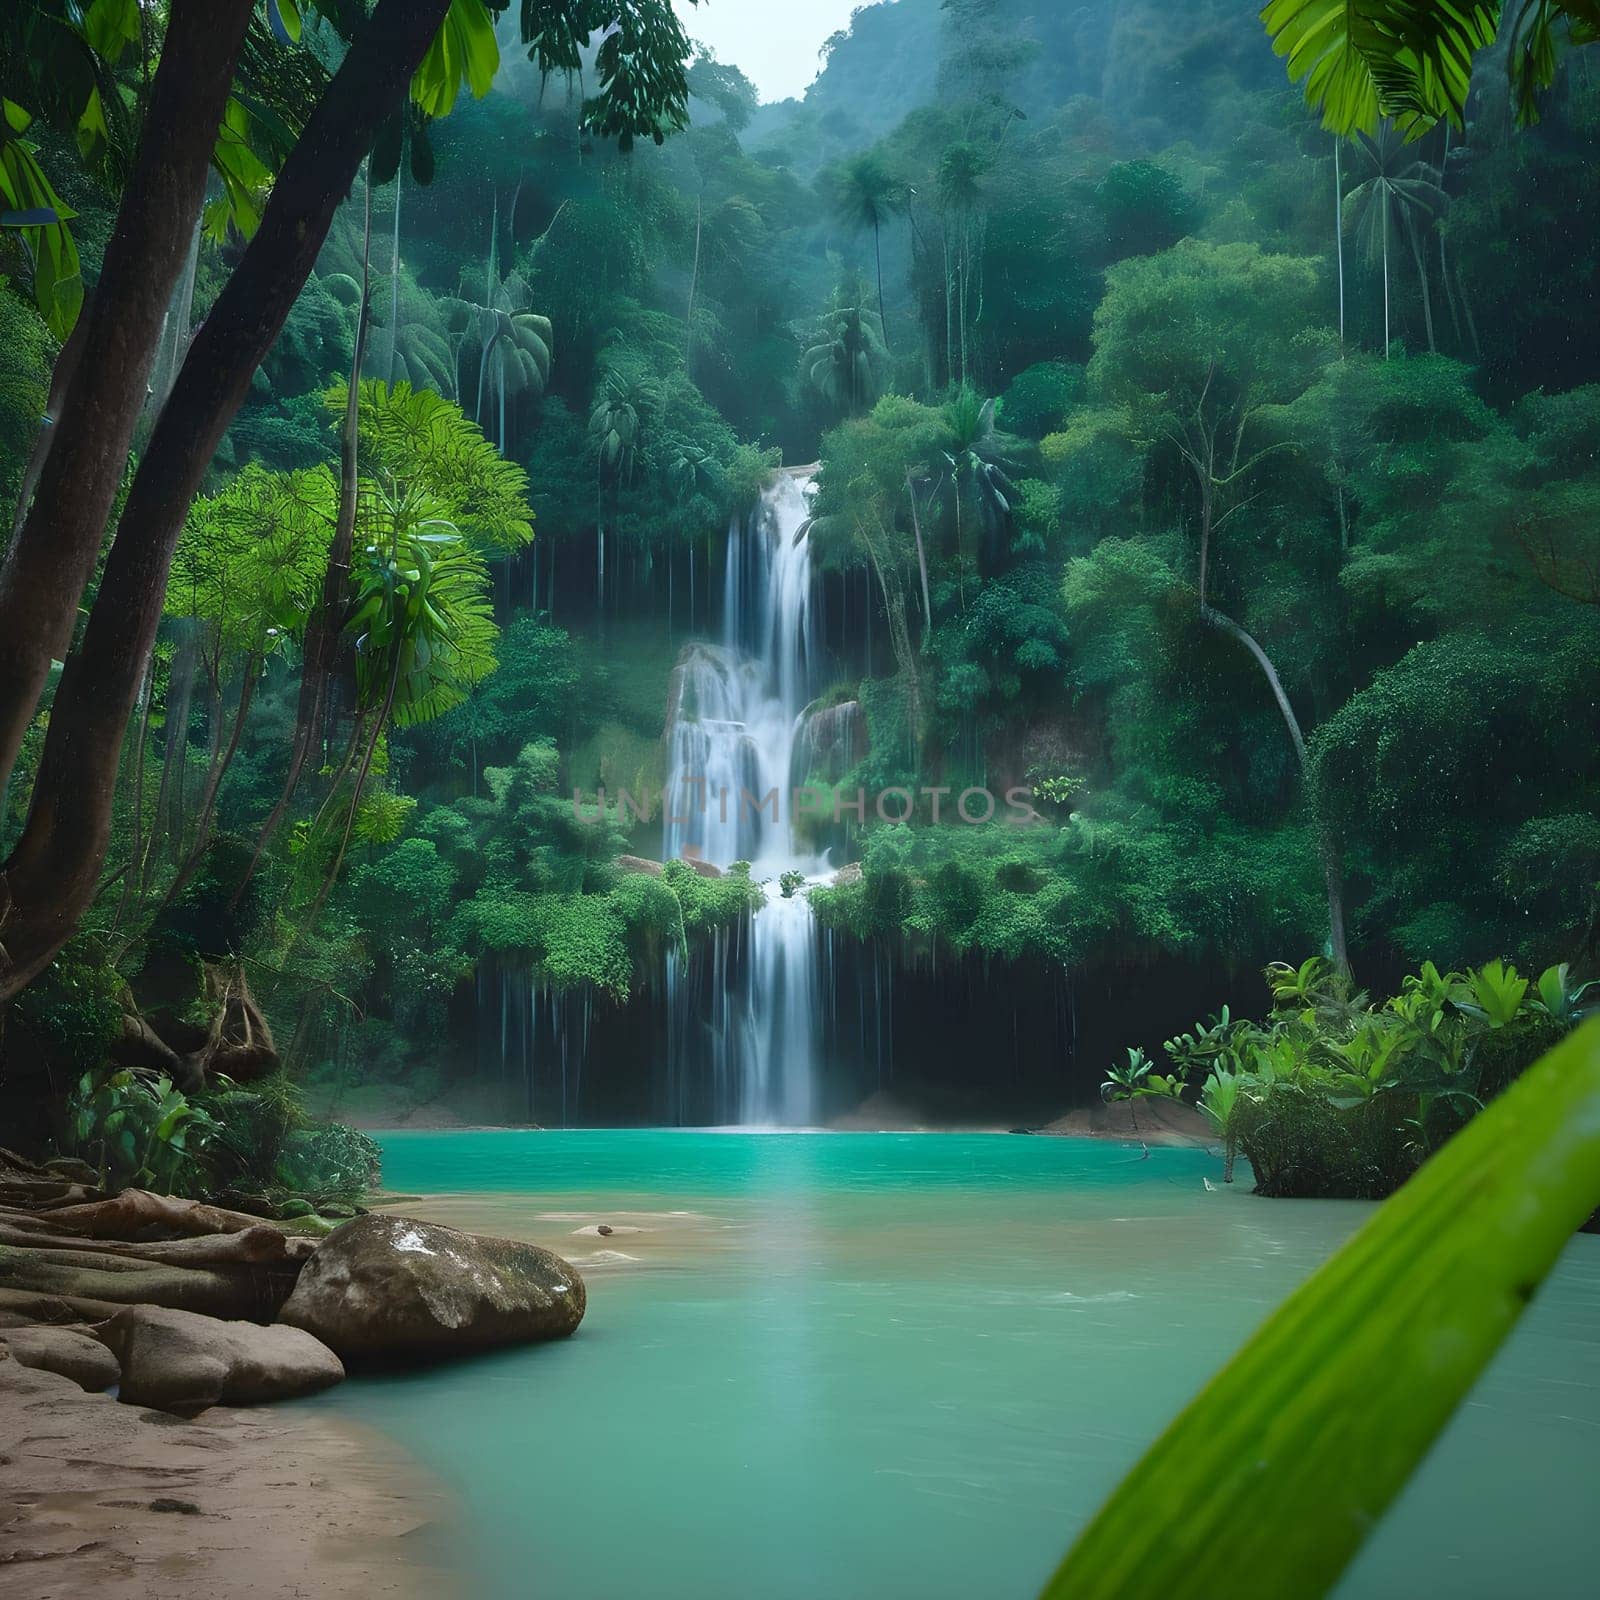 Turquoise Tranquility: Exploring the Kuang Si Cascade Waterfall by Petrichor